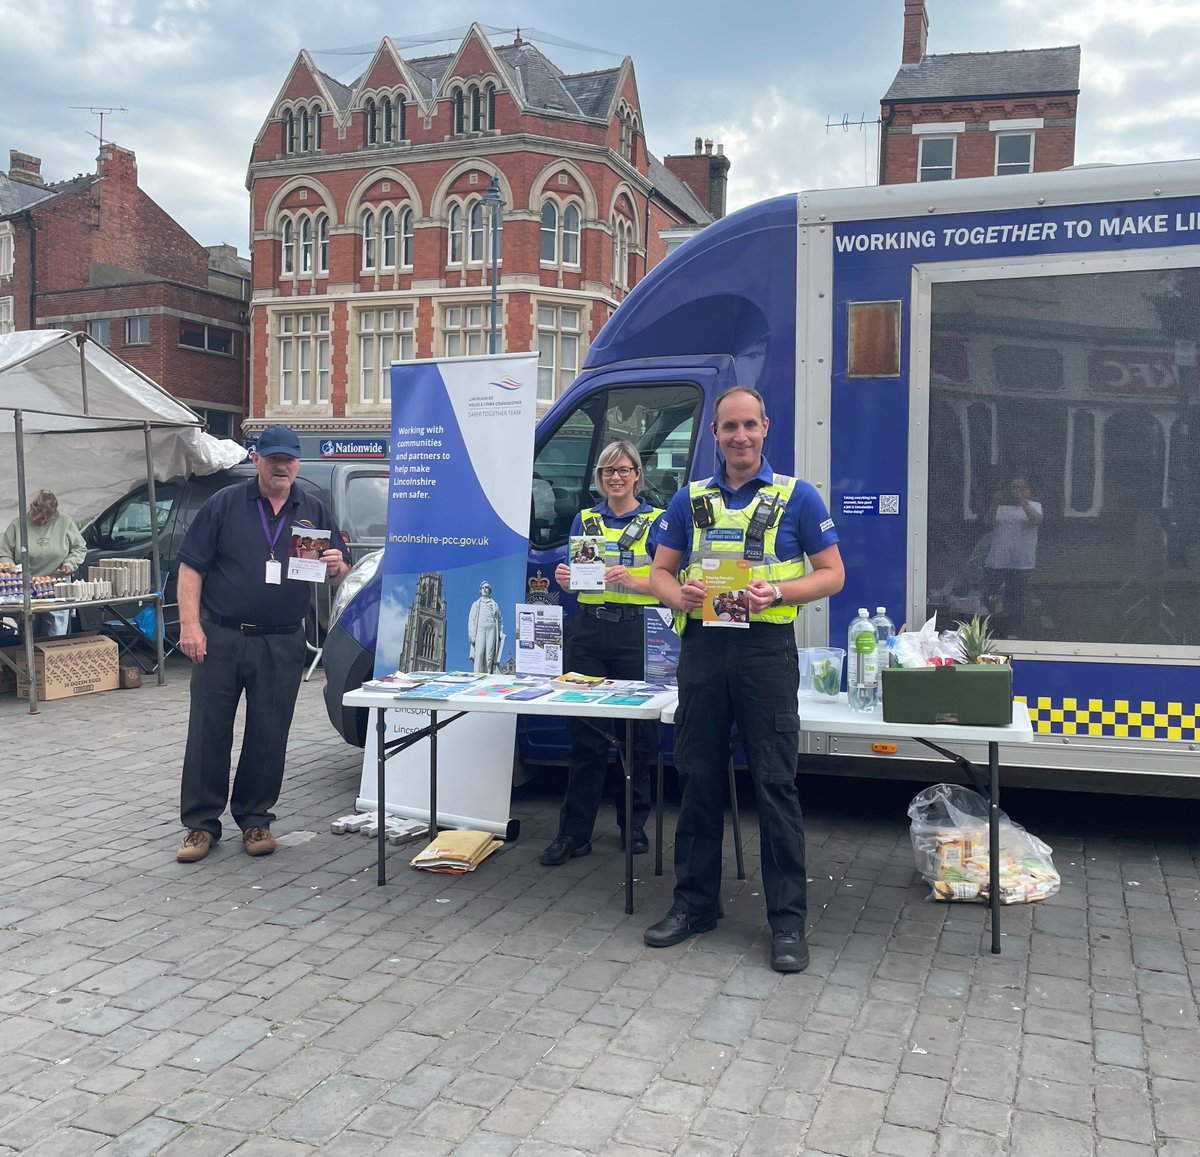 Doing our bit in Boston today is support of Alcohol Awareness Week. Mocktails went down very well with the public, in between dodging the showers.
communityalcoholpartnerships.co.uk
#AlcoholAwarenessWeek